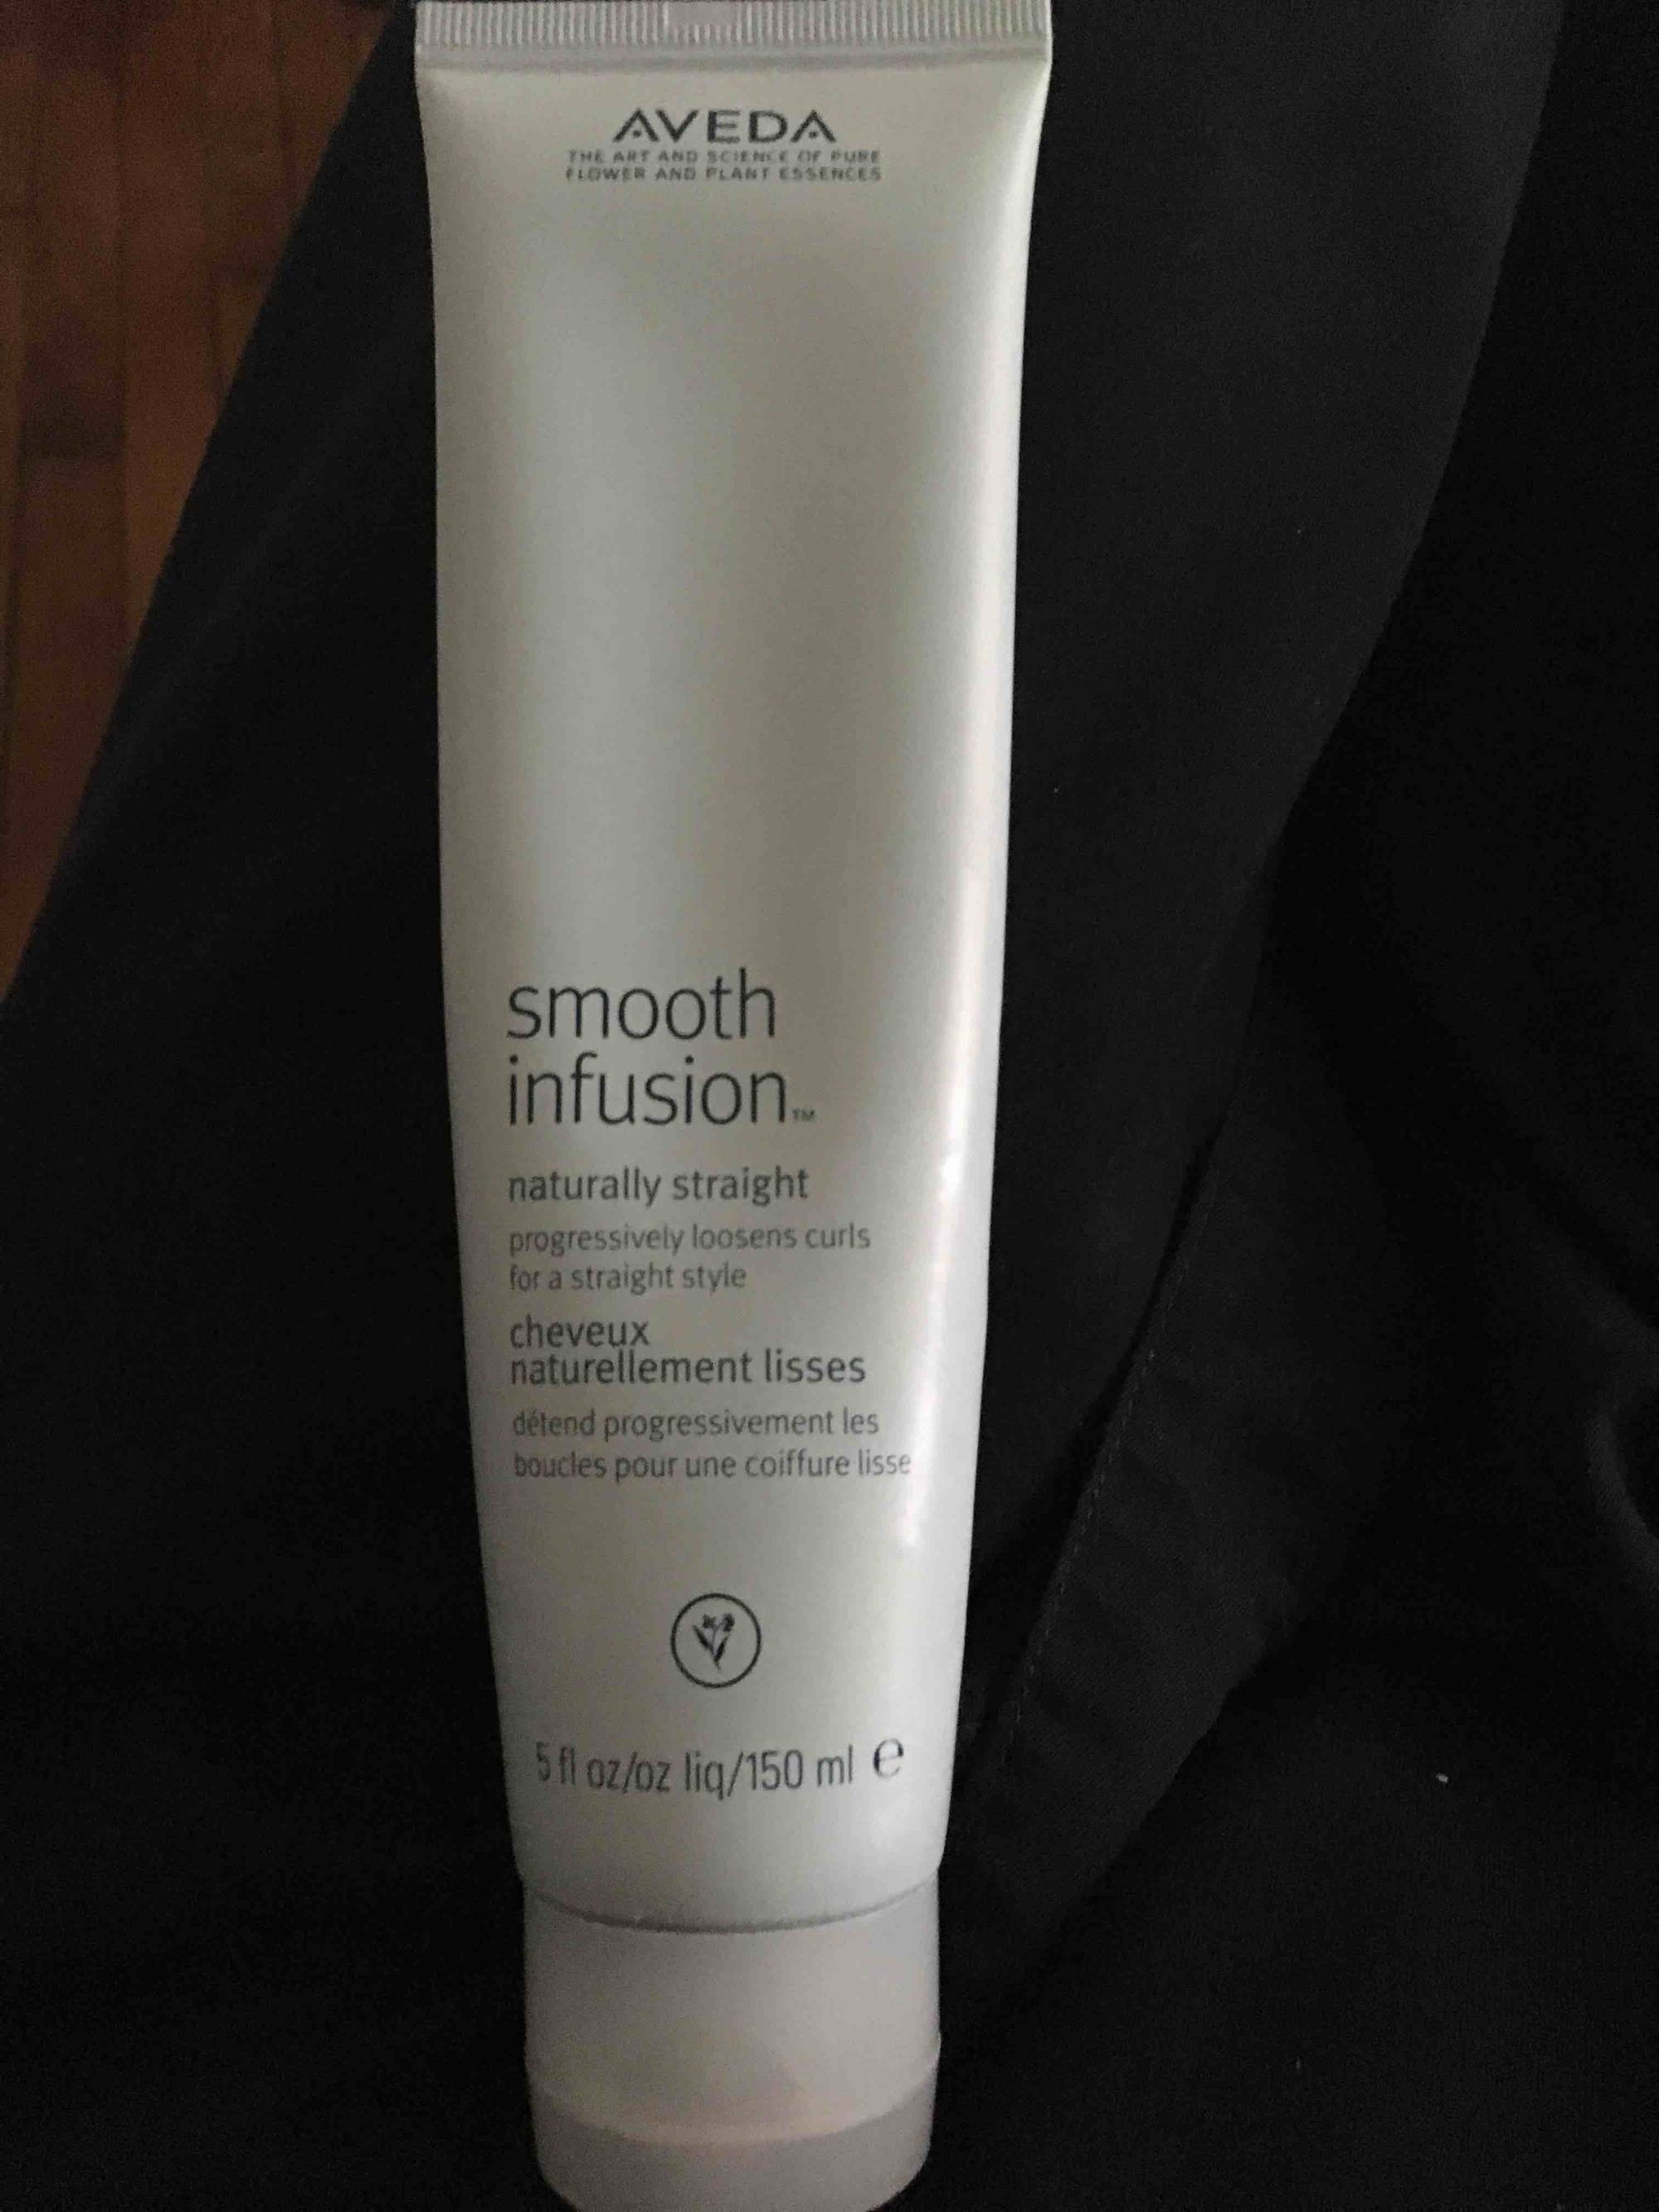 AVEDA - Smooth infusion - Cheveux naturellement lisses